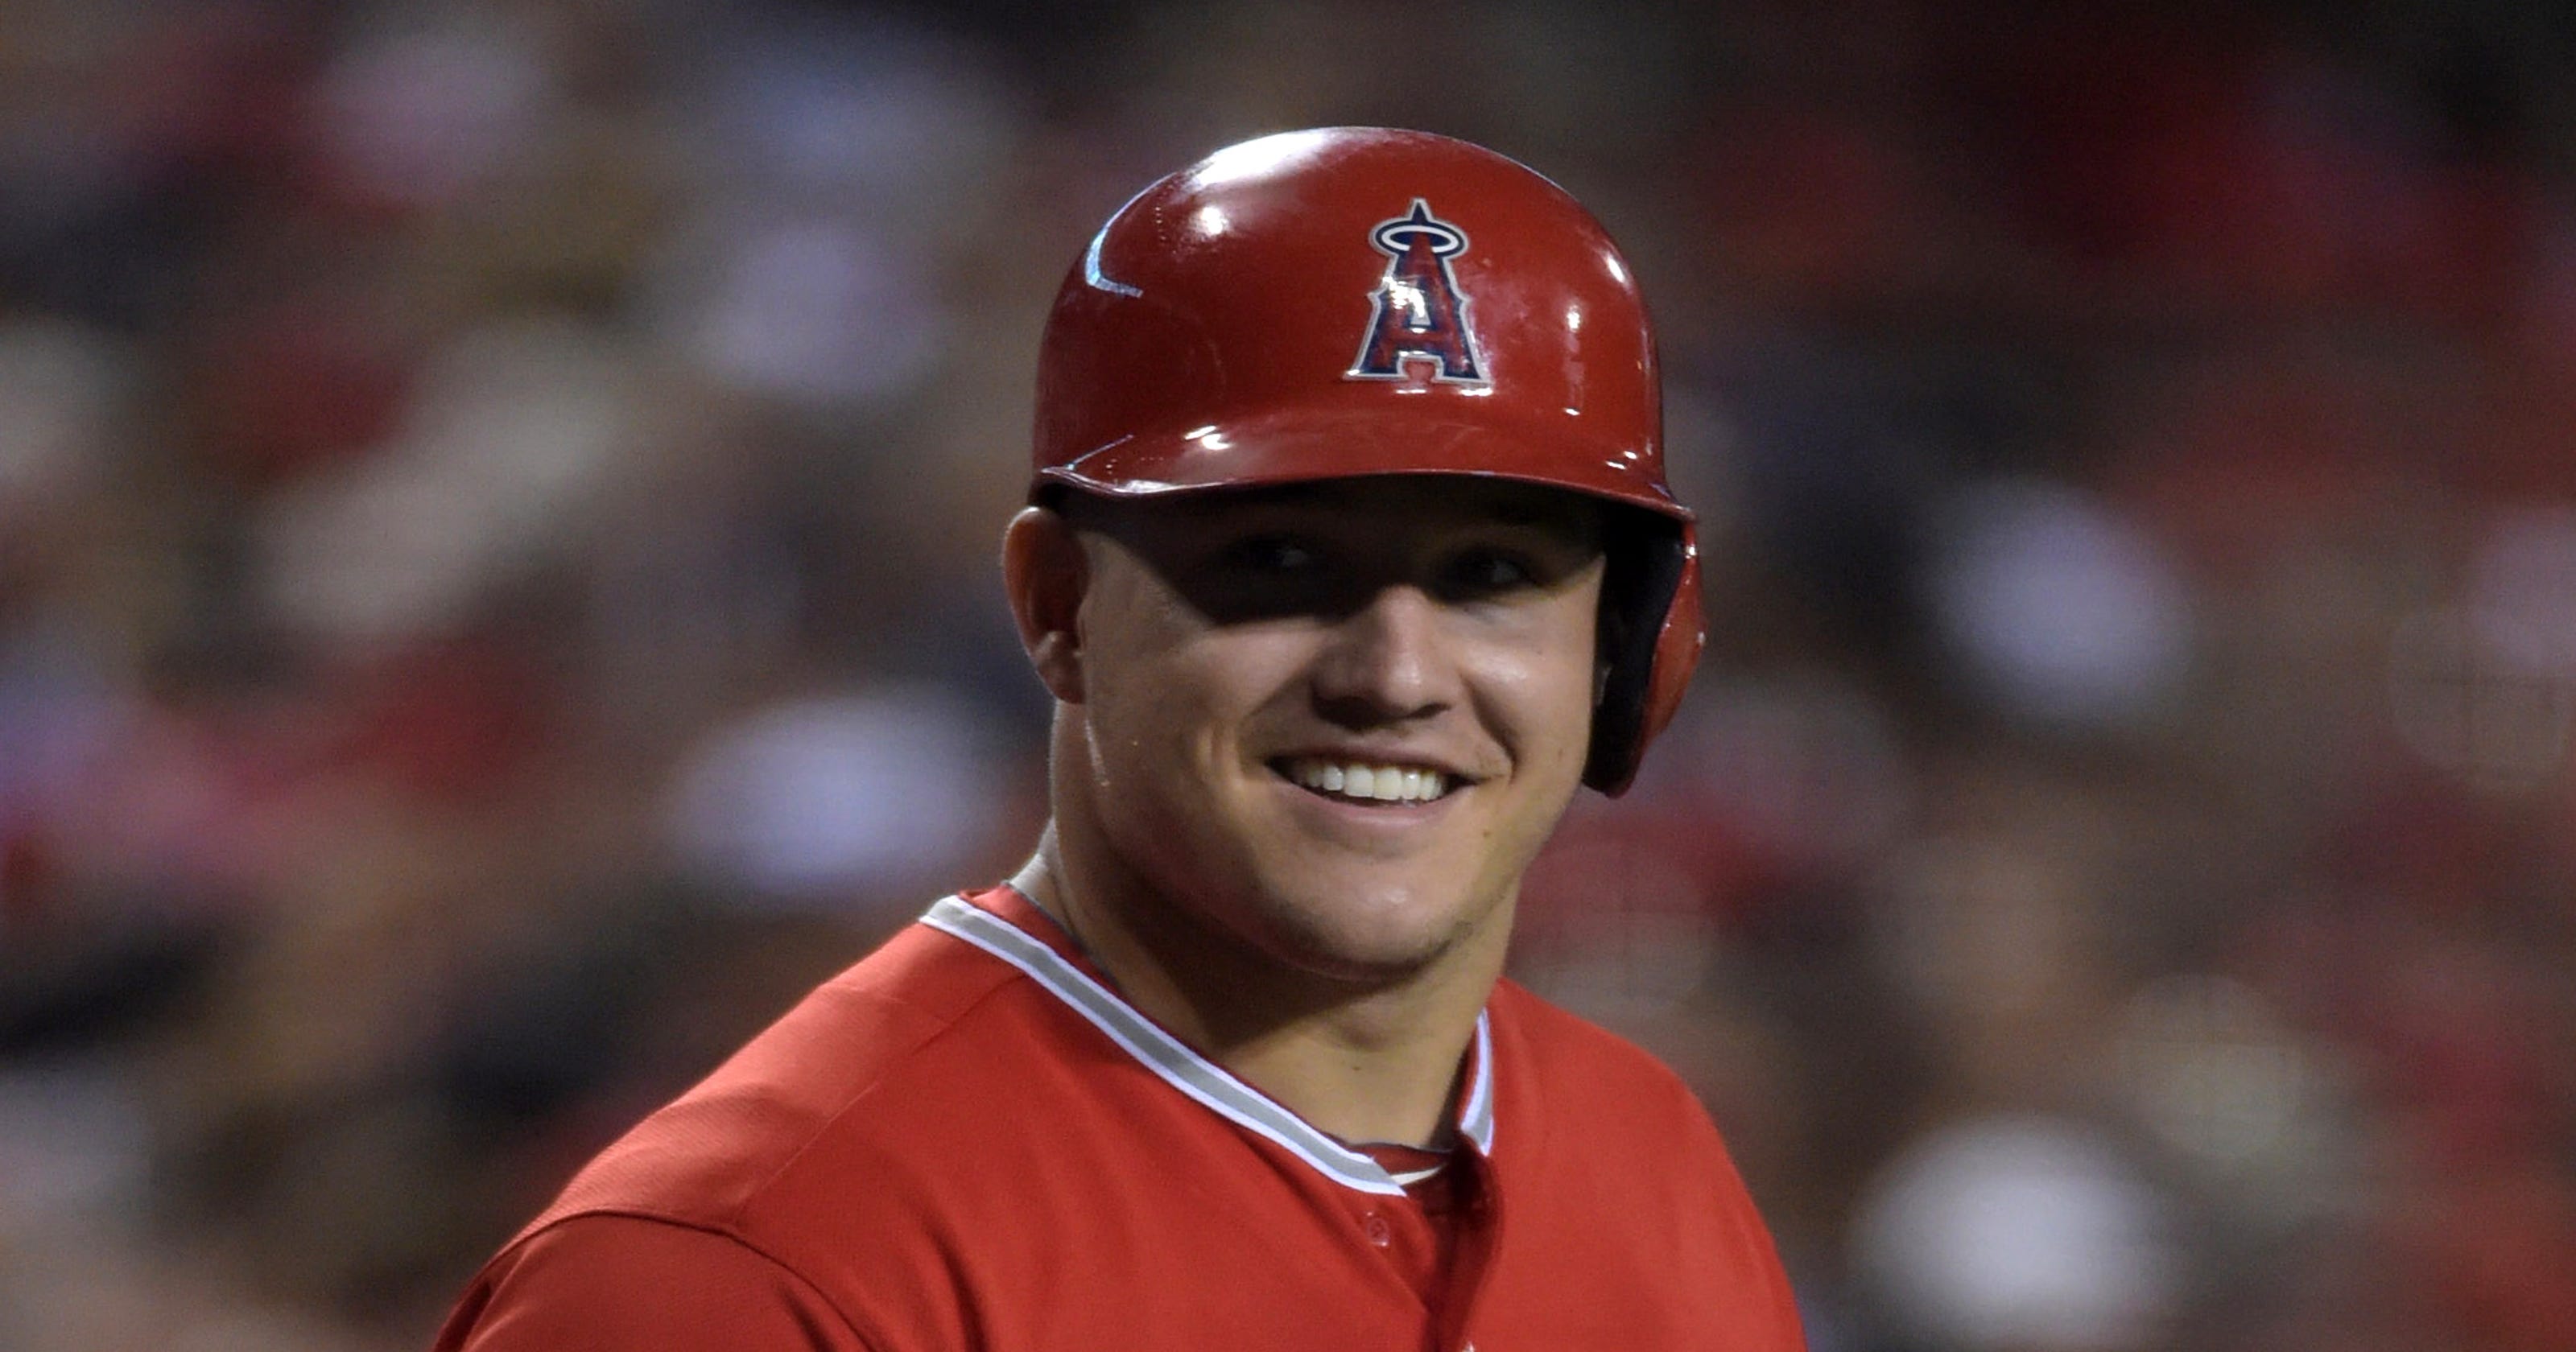 Mike Trout meets Stephen Curry on Tuesday, will honor Kobe Bryant on ...